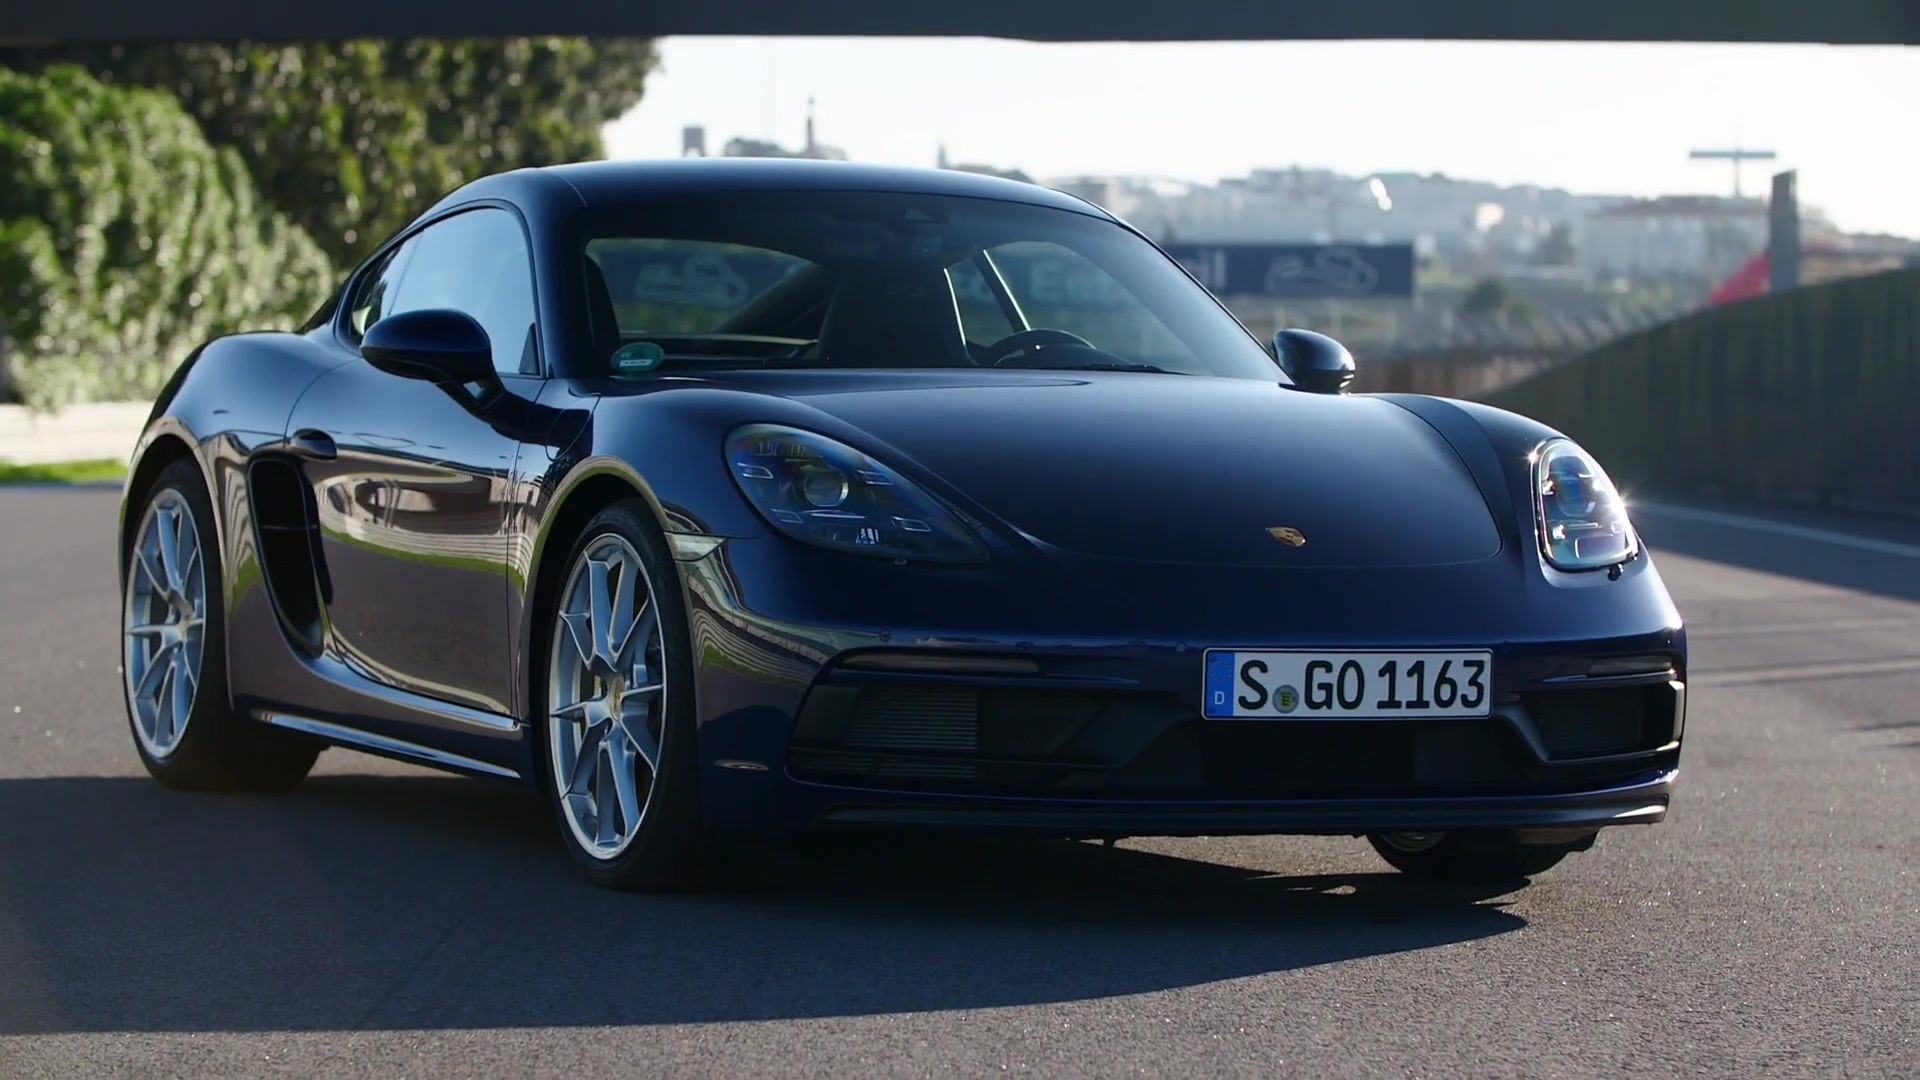 The New Porsche 718 Cayman Gts 4 0 Design In Gentian Blue Video Dailymotion